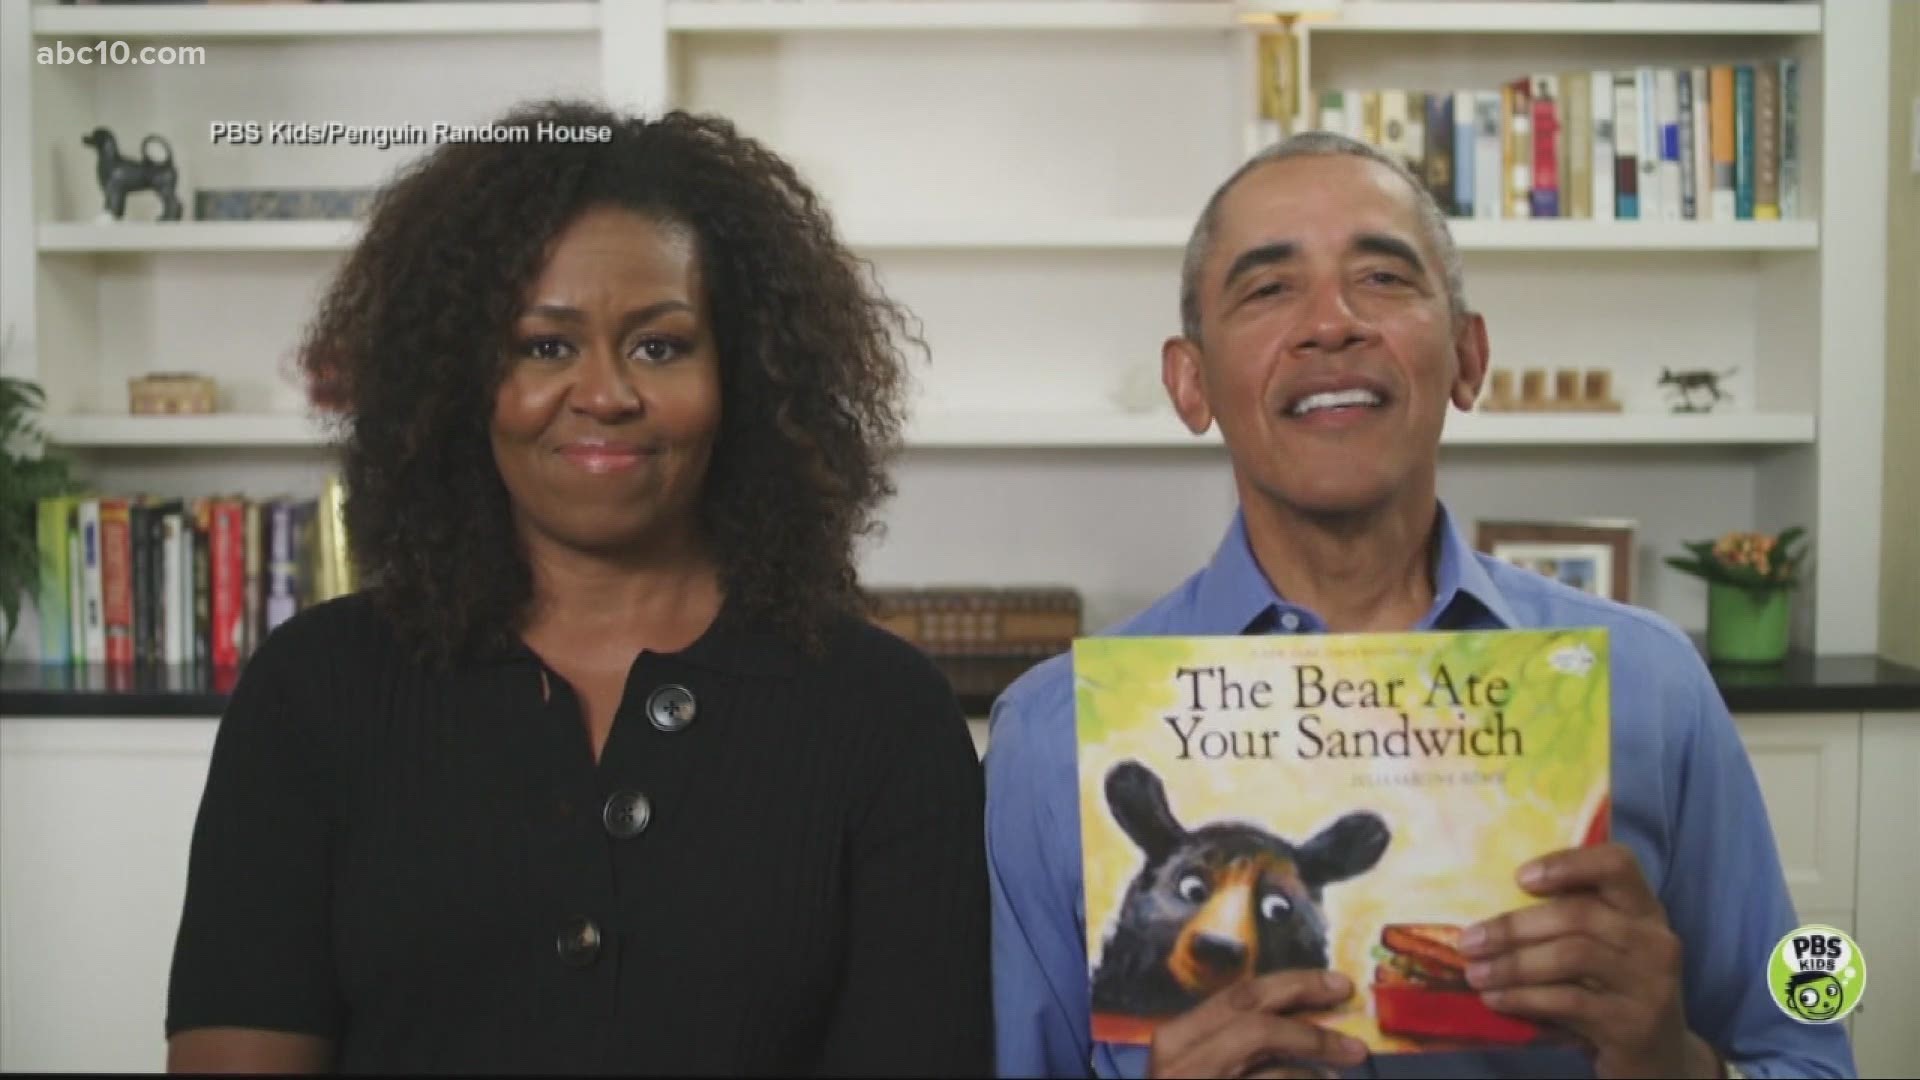 Barack Obama is joining his wife Michelle for her PBS series reading books to children & a registered nurse develops a special mask to help the hearing impaired.